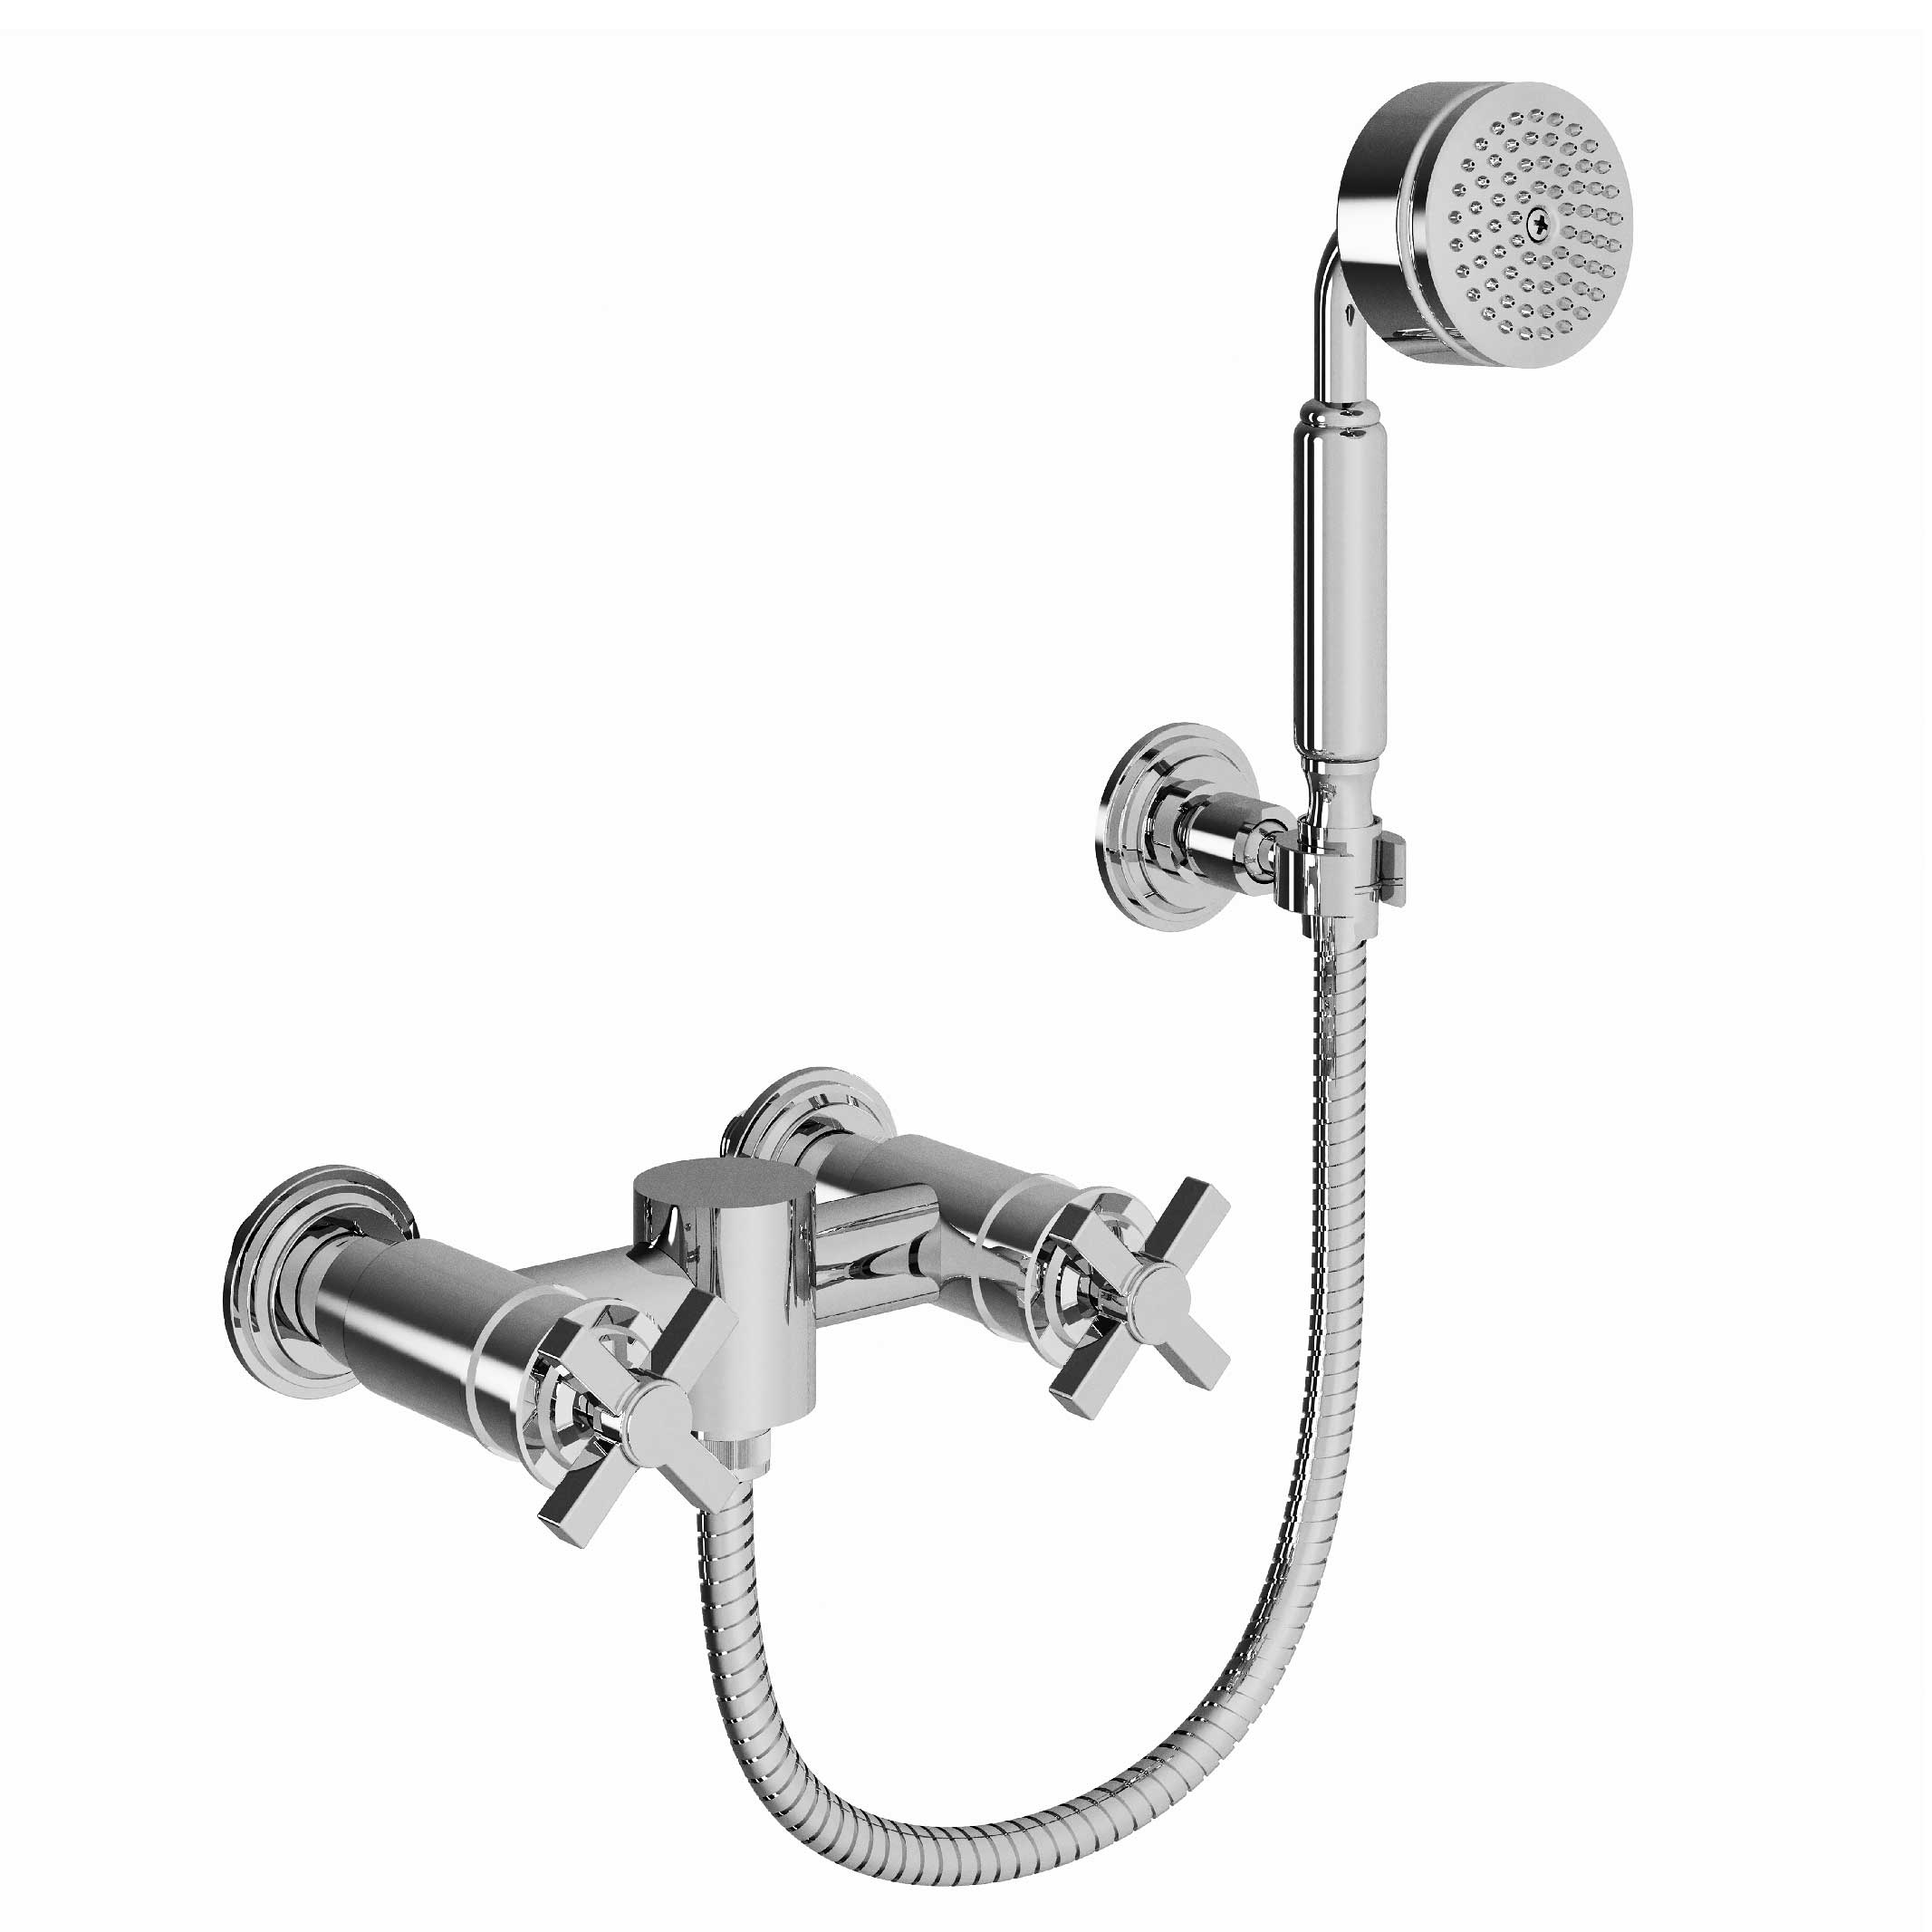 M60-2201 Shower mixer with hook